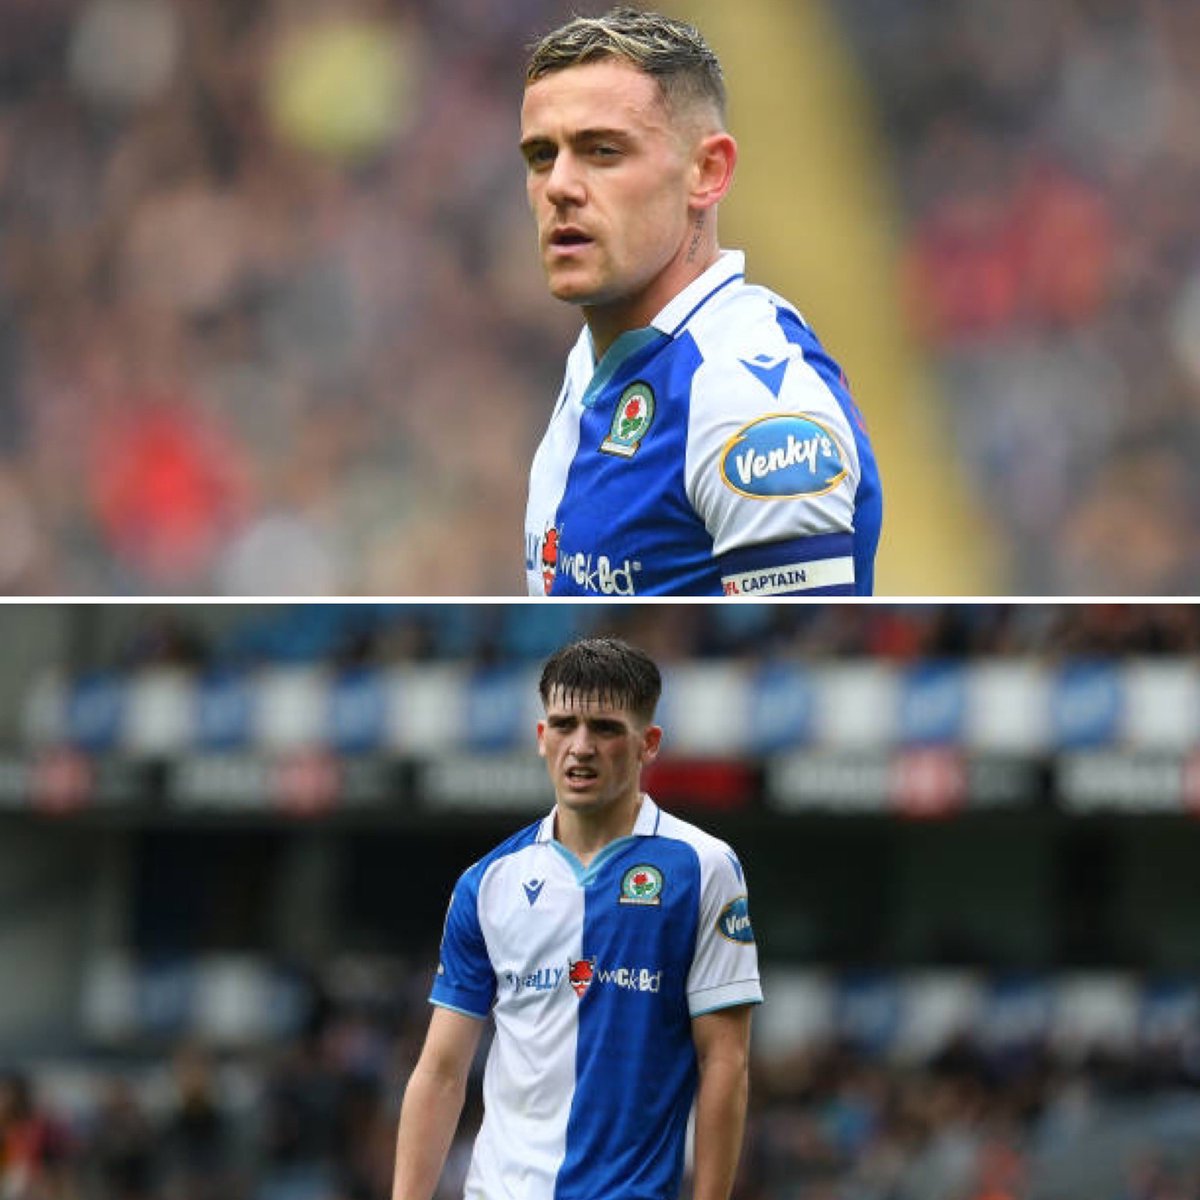 🇮🇪| Another two goals for Sammie Szmodics today Both assisted by Andrew Moran IRELAND. SQUAD. NOW 😍😍😍